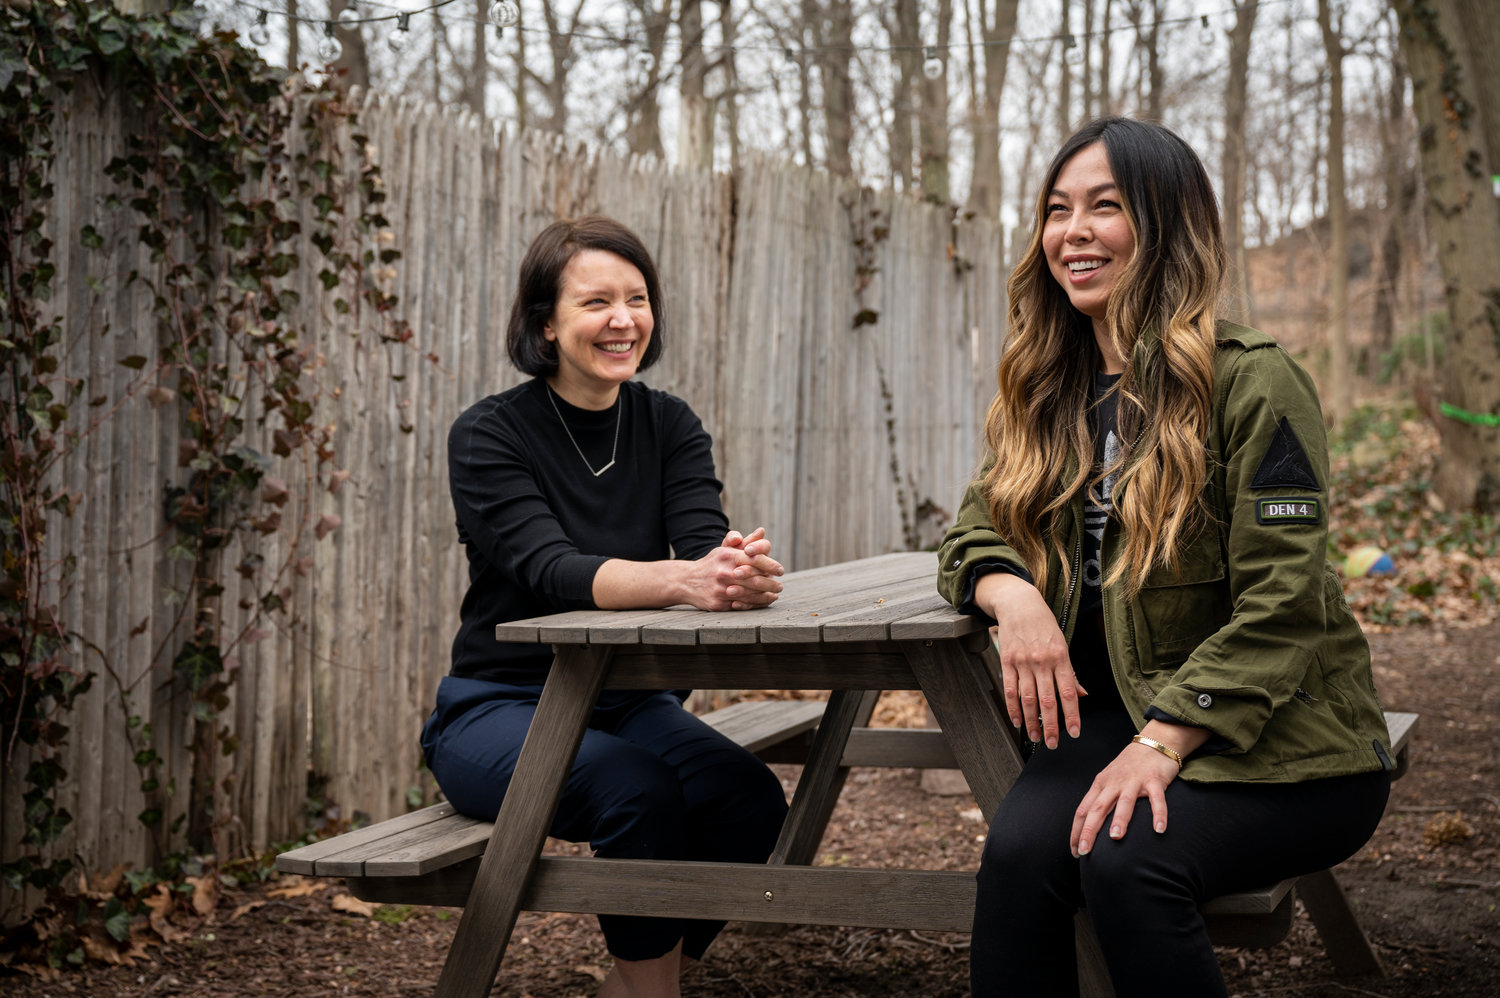 This summer, if everything goes right, a new coffee shop called Earlybird will open in North Riverdale. Owners Katie Mayer and Heather Kim were displeased with the lack of independent coffee shops in the neighborhood, deciding to open their own to fill that gap.